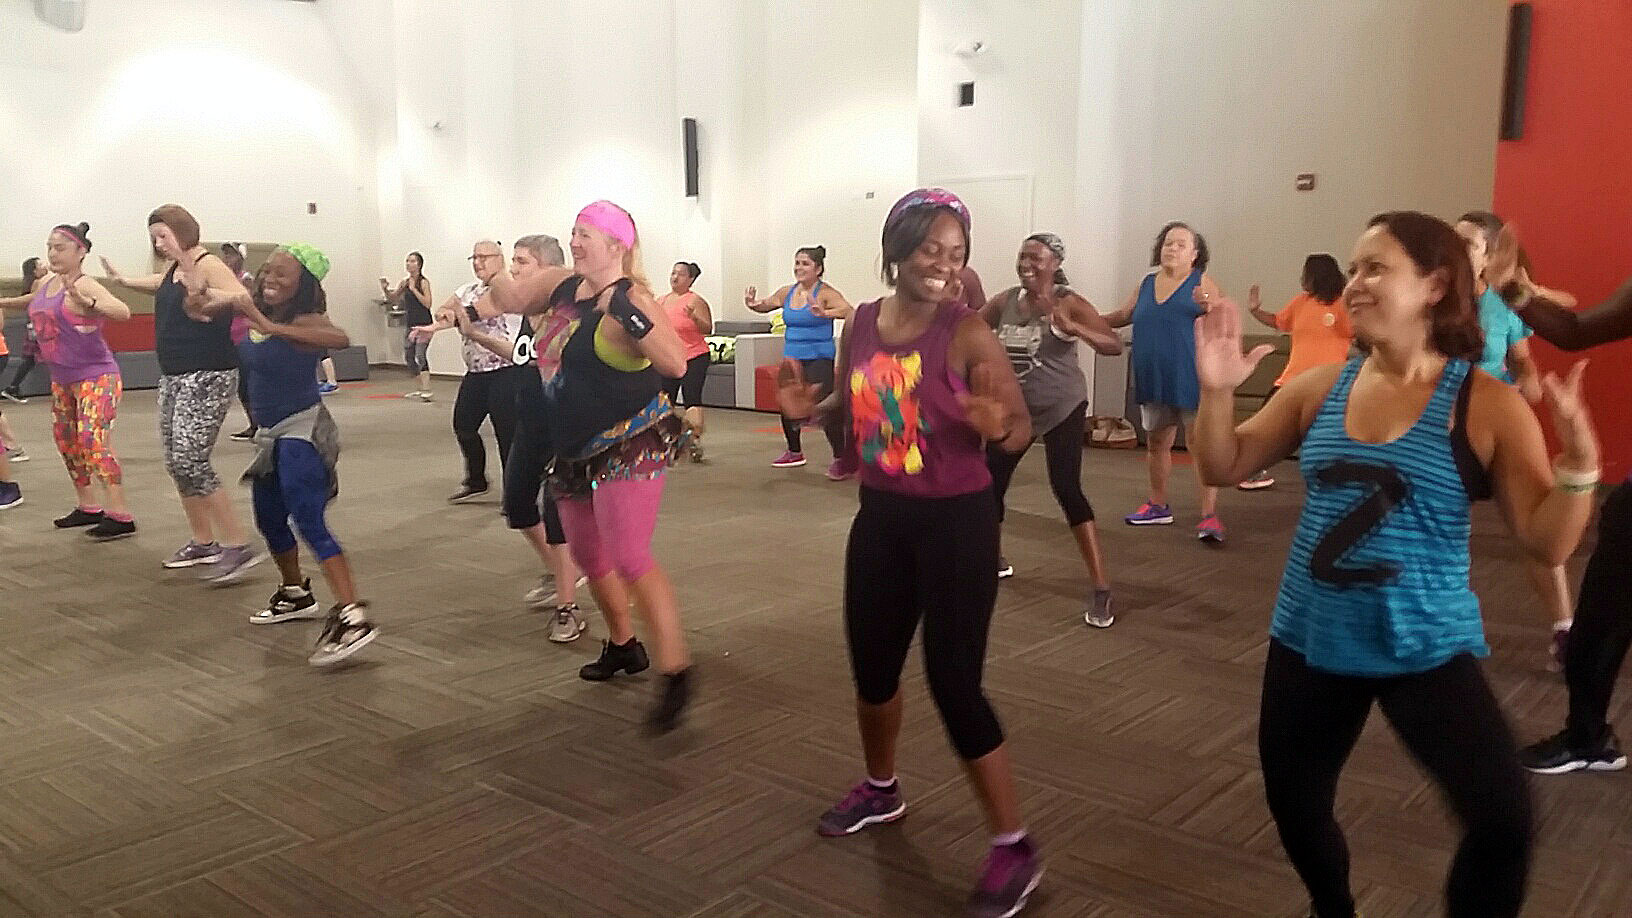 The goal of this Zumbathon event was to raise funds for victims of an explosion at Flower Branch Apartments in Silver Spring, Md. (WTOP/Kathy Stewart)